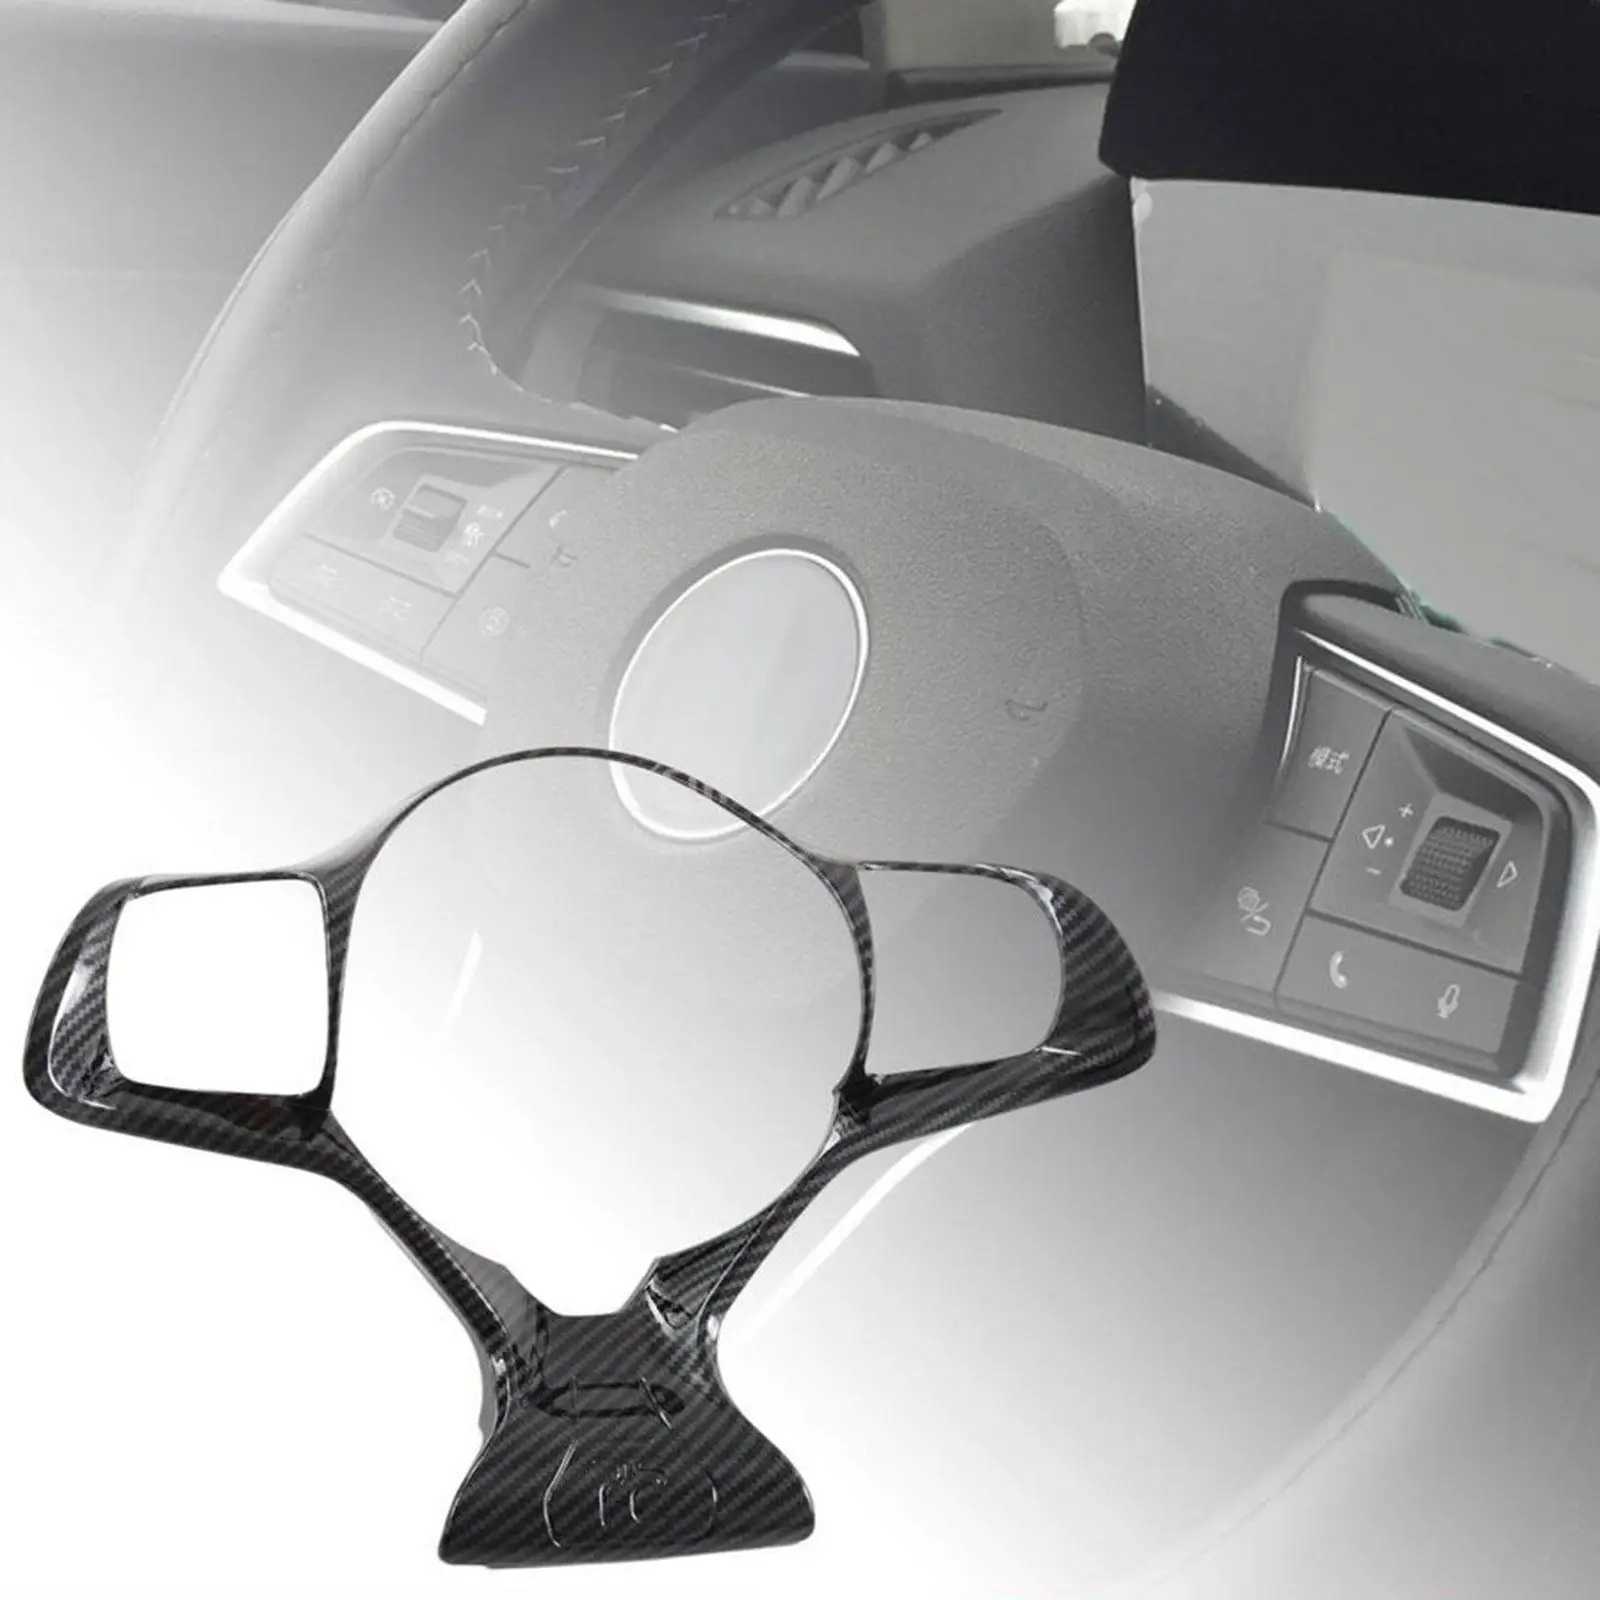 Auto Steering Wheel Frame Cover Trim Sticker Styling Accessory, Easy to Install,